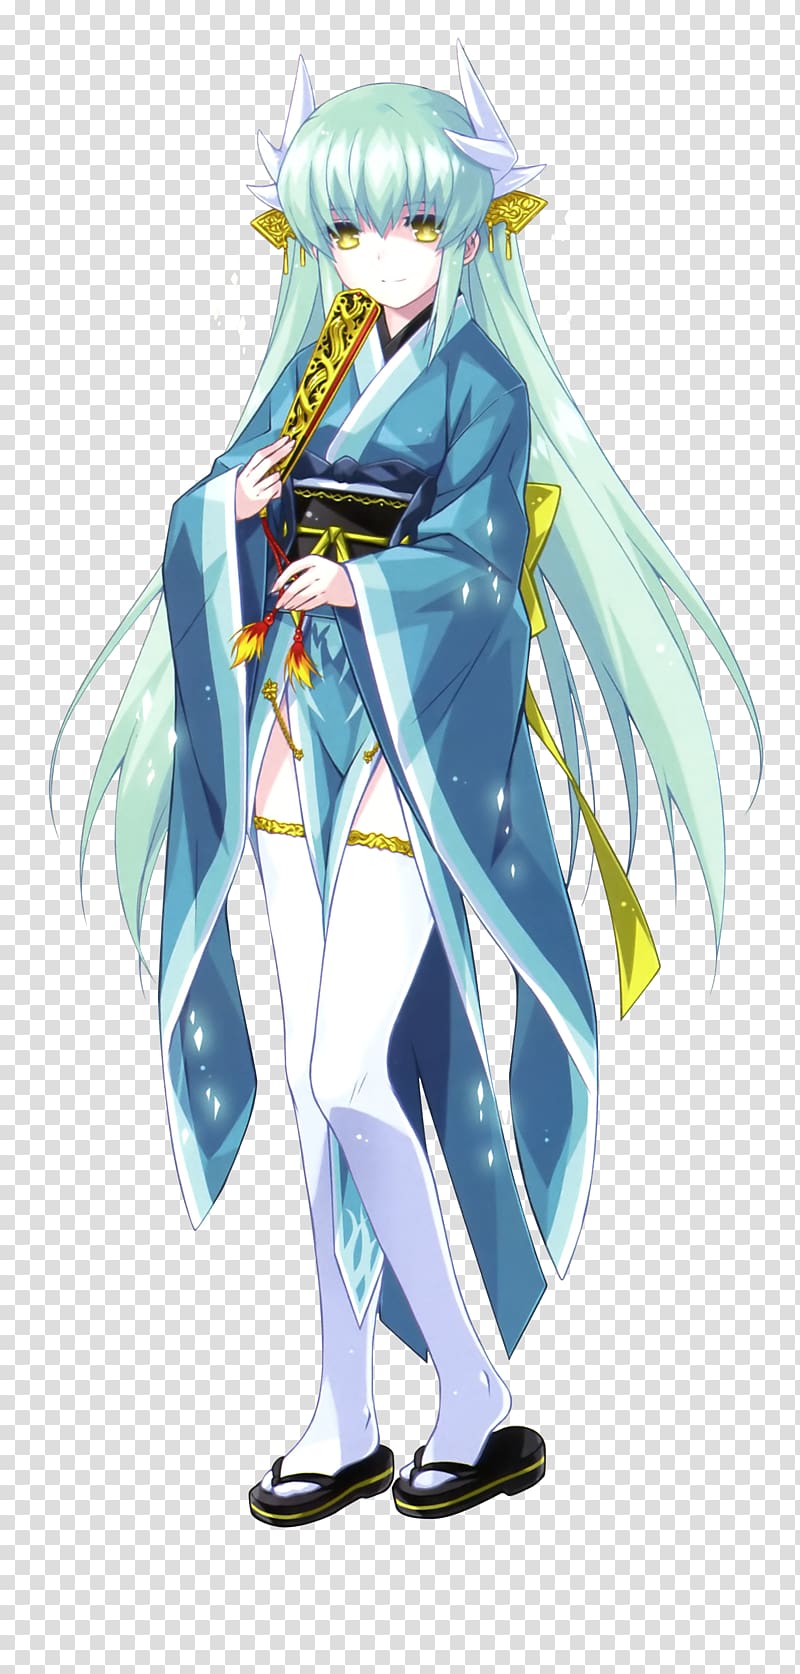 Fate/stay night Fate/Grand Order Kiyohime Fate/Zero Fate/Extra, Anime transparent background PNG clipart